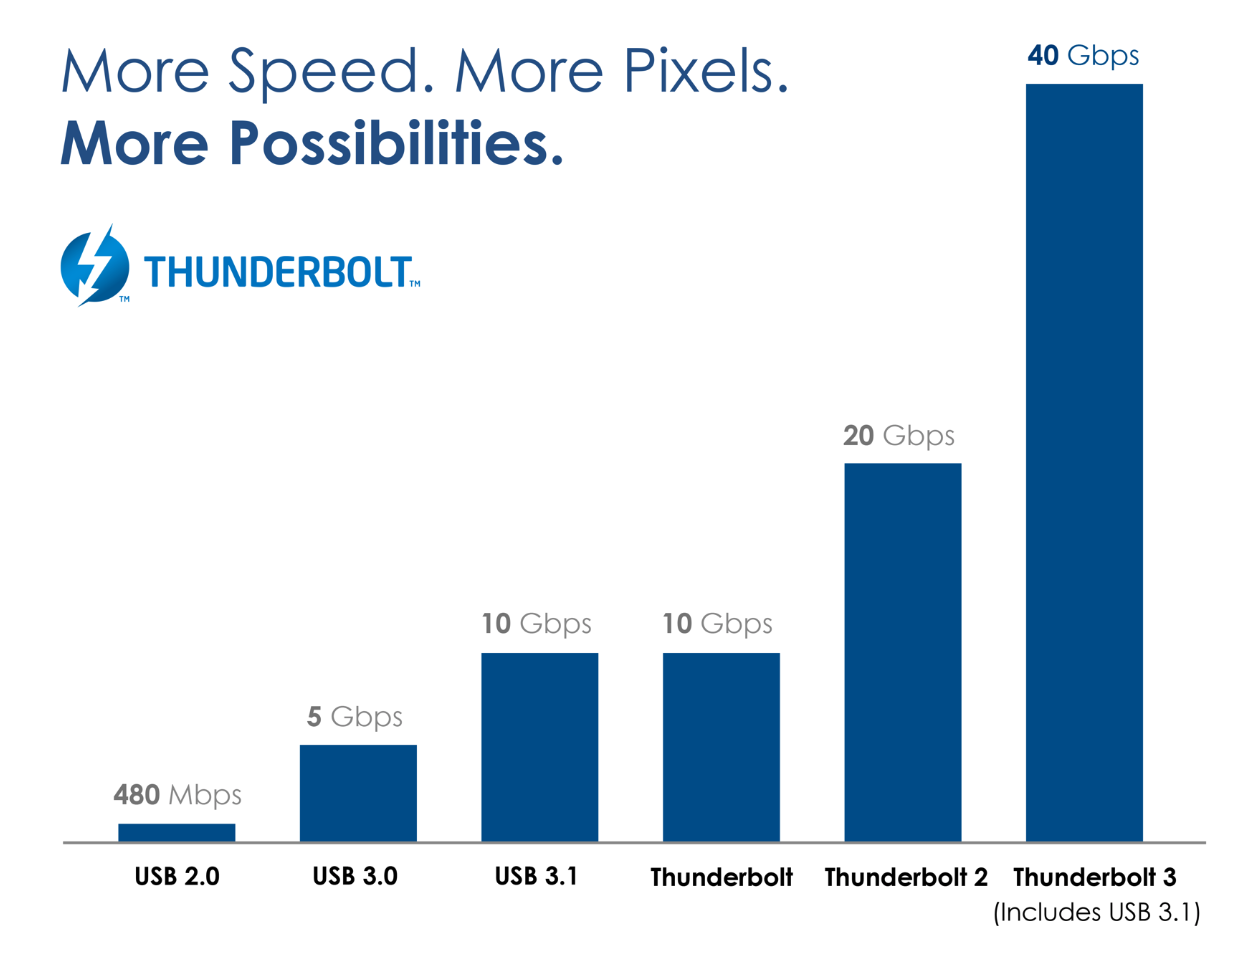 Thunderbolt 3 delivers data at 40Gbps which is much higher than previous protocols